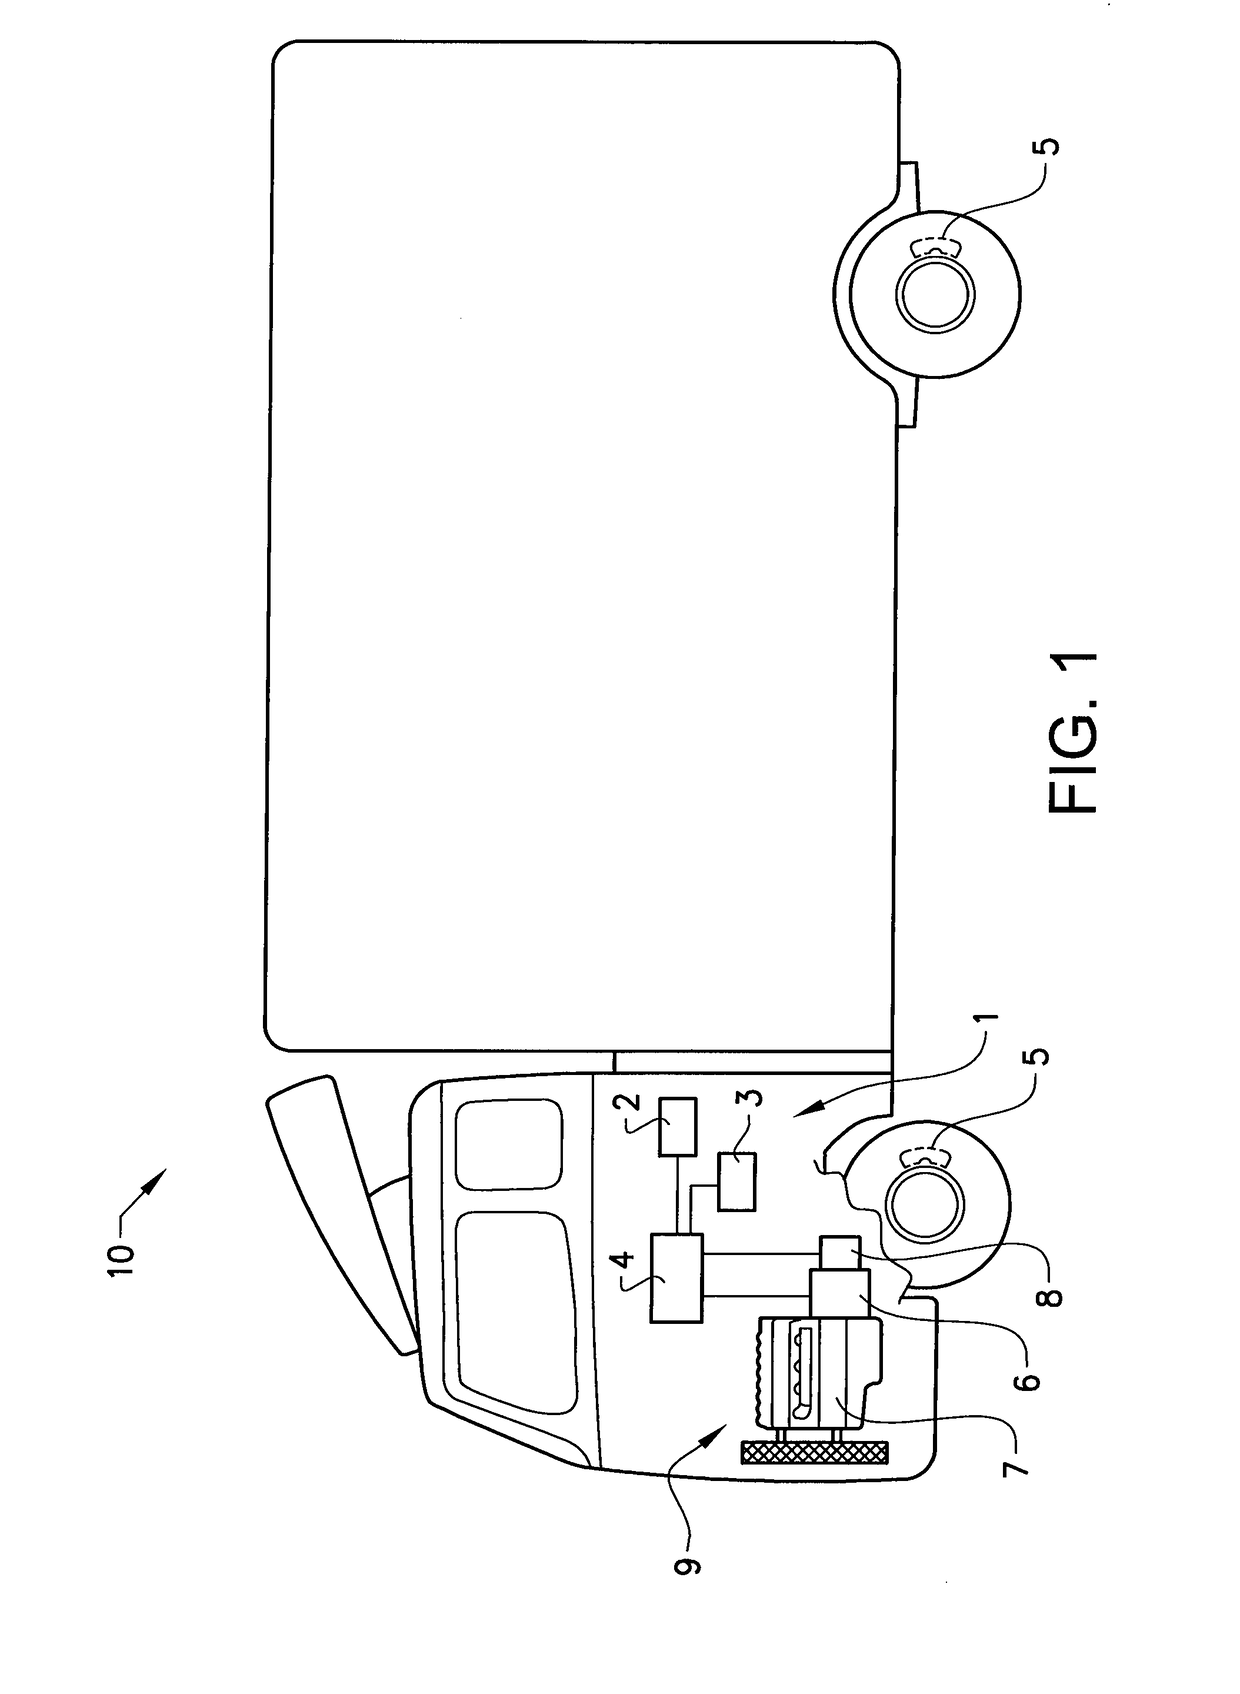 An arrangement and method for a cruise control brake in a vehicle